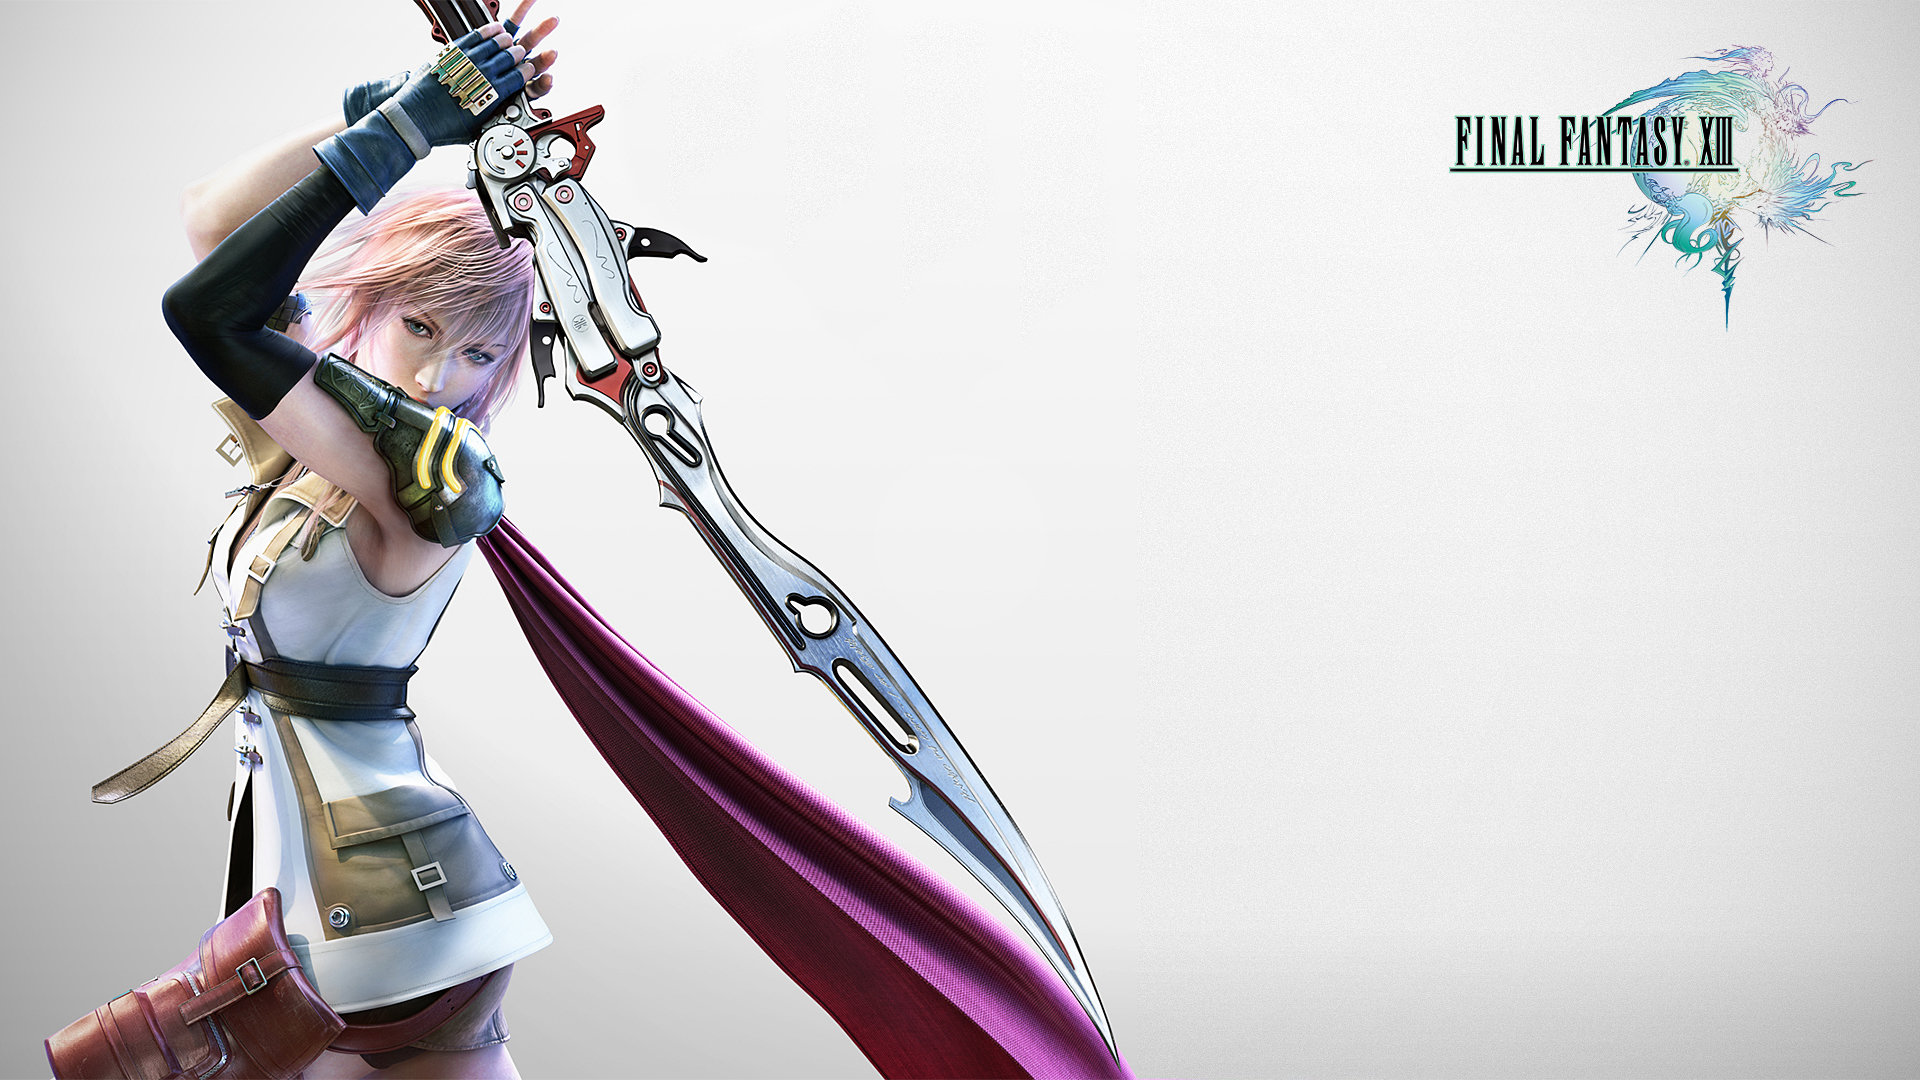 Best Final Fantasy XIII (FF13) wallpaper ID:175300 for High Resolution full hd 1080p computer